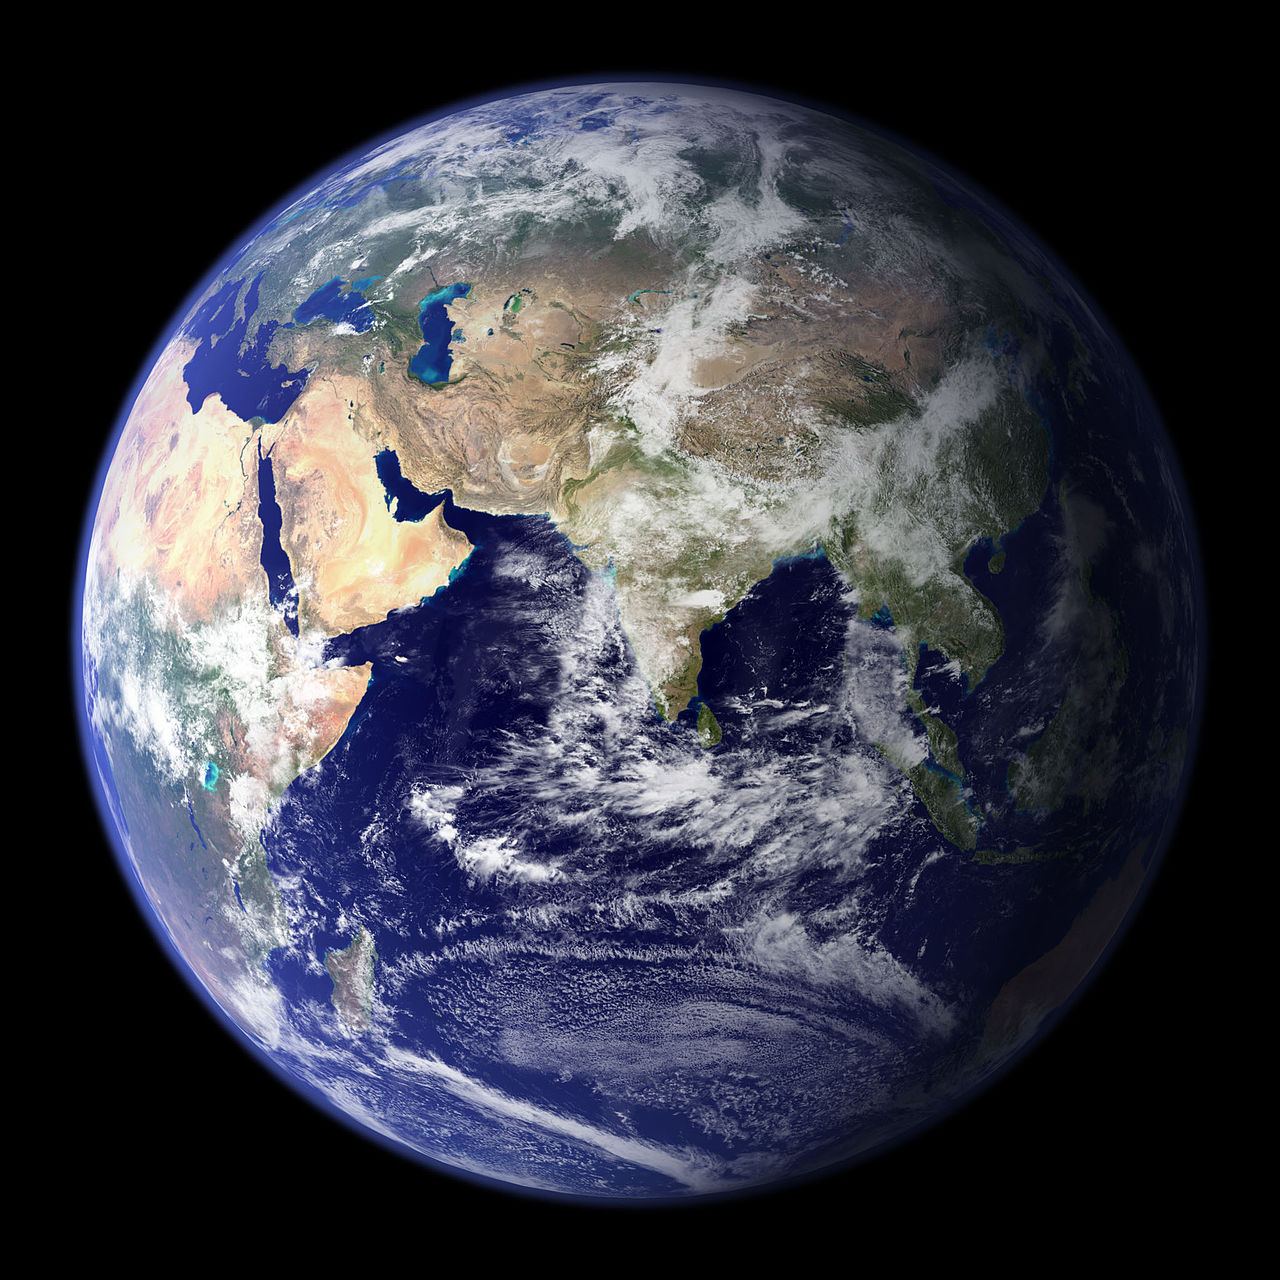 Image of a Rocky Planet Earth.